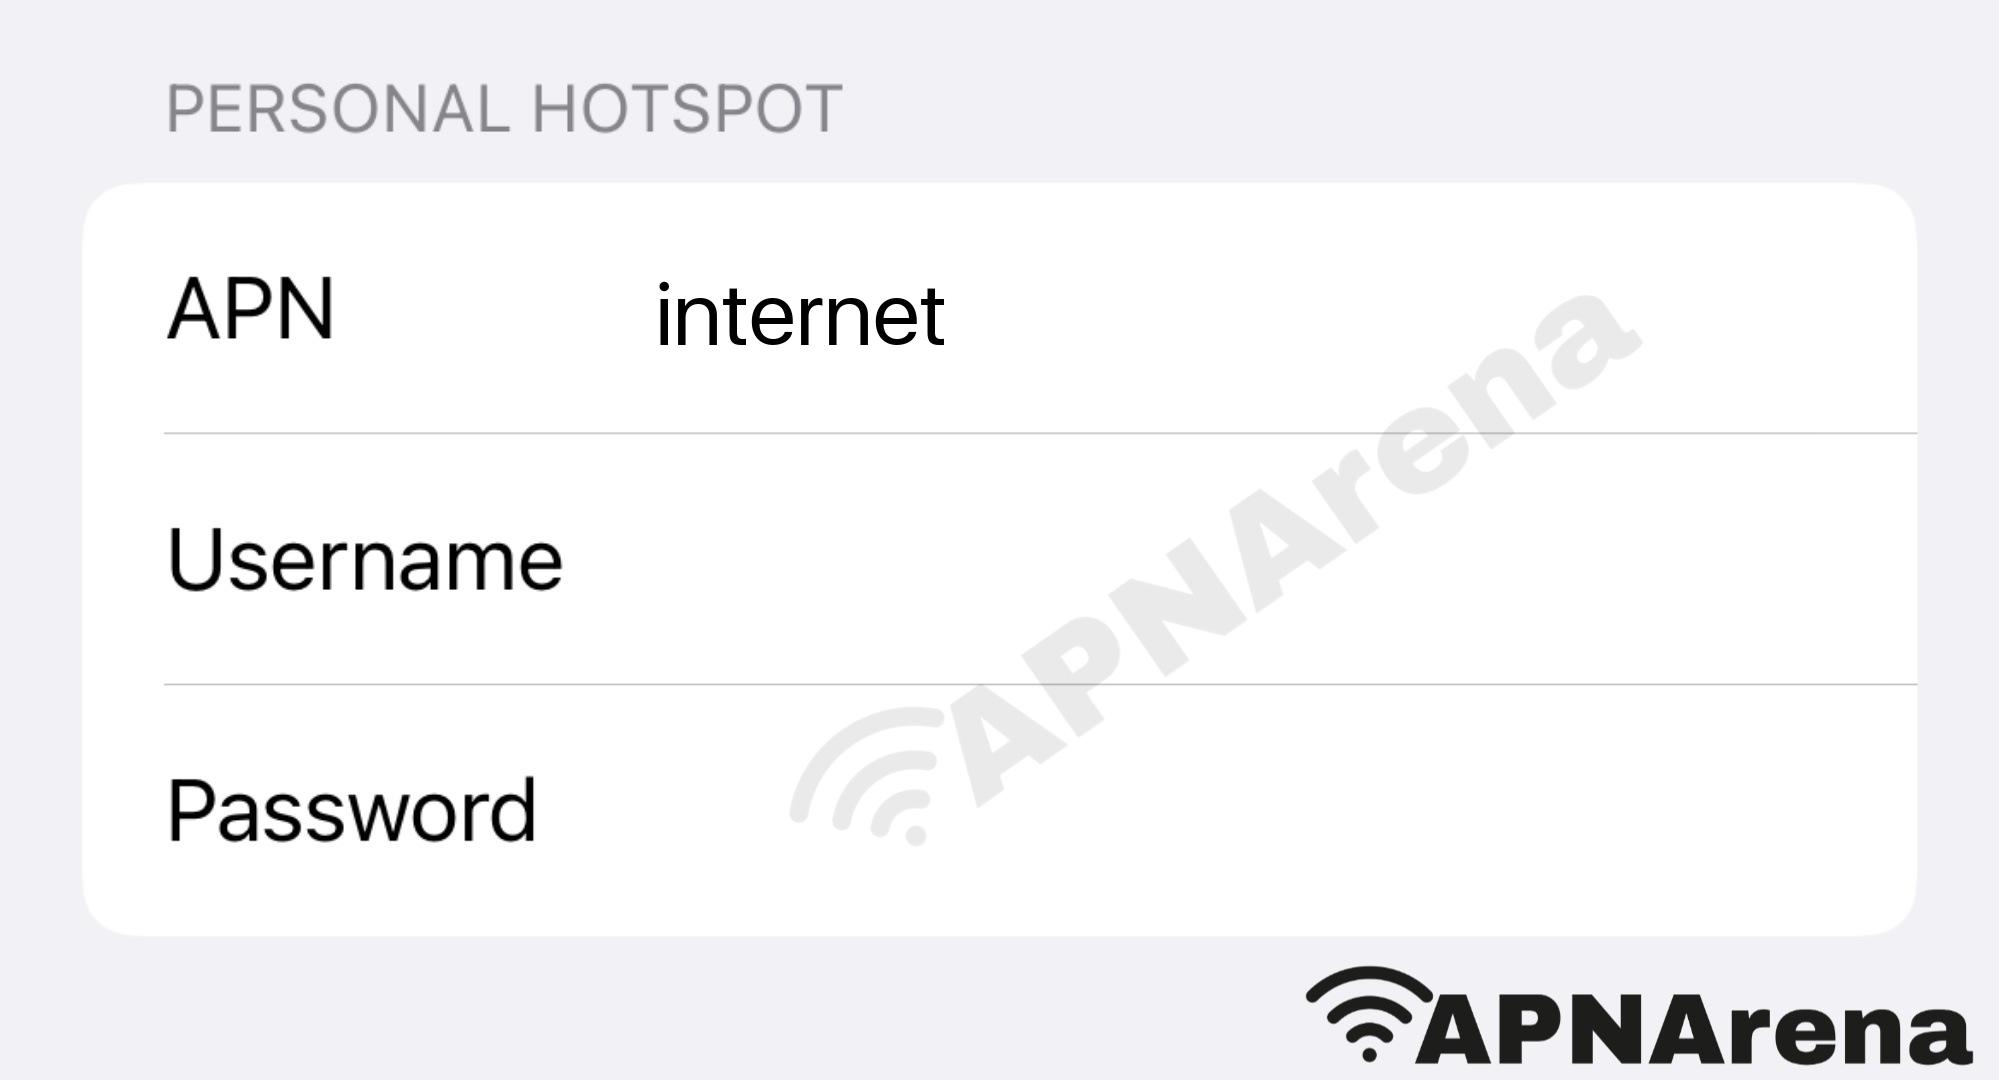 VOO Personal Hotspot Settings for iPhone